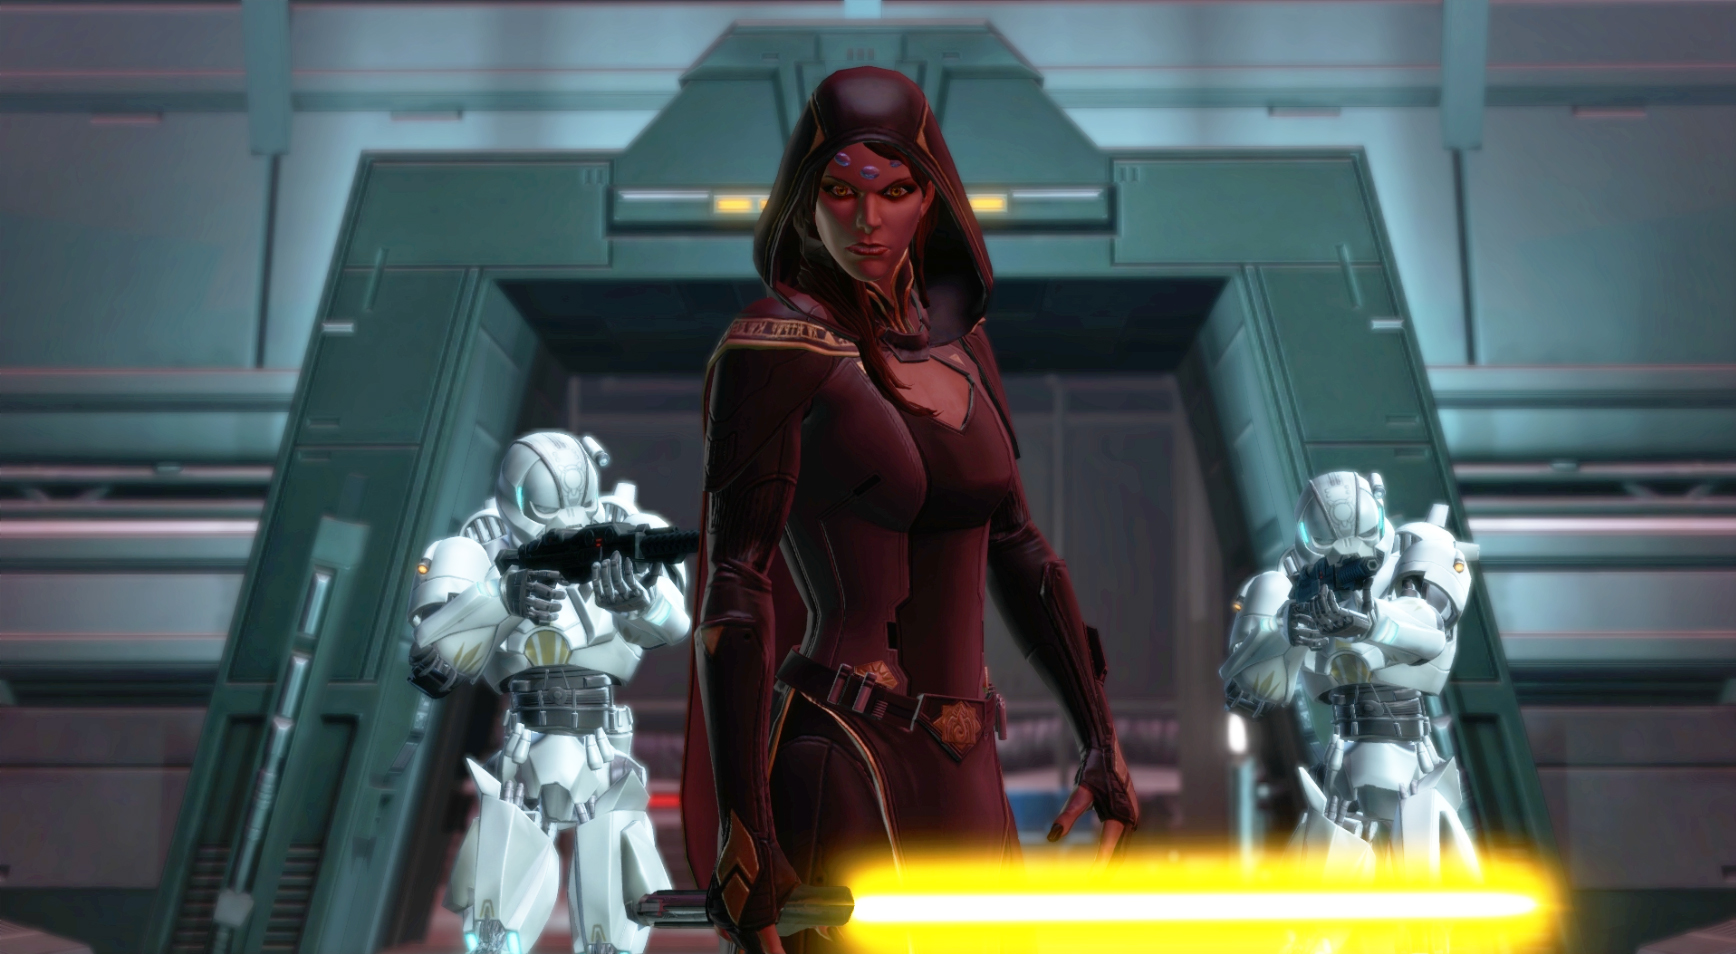 swtor kotfe profitandplunder valyinisfurious Star Wars: The Old Republic - Knights of the Fallen Empire "Profit and Plunder" Released